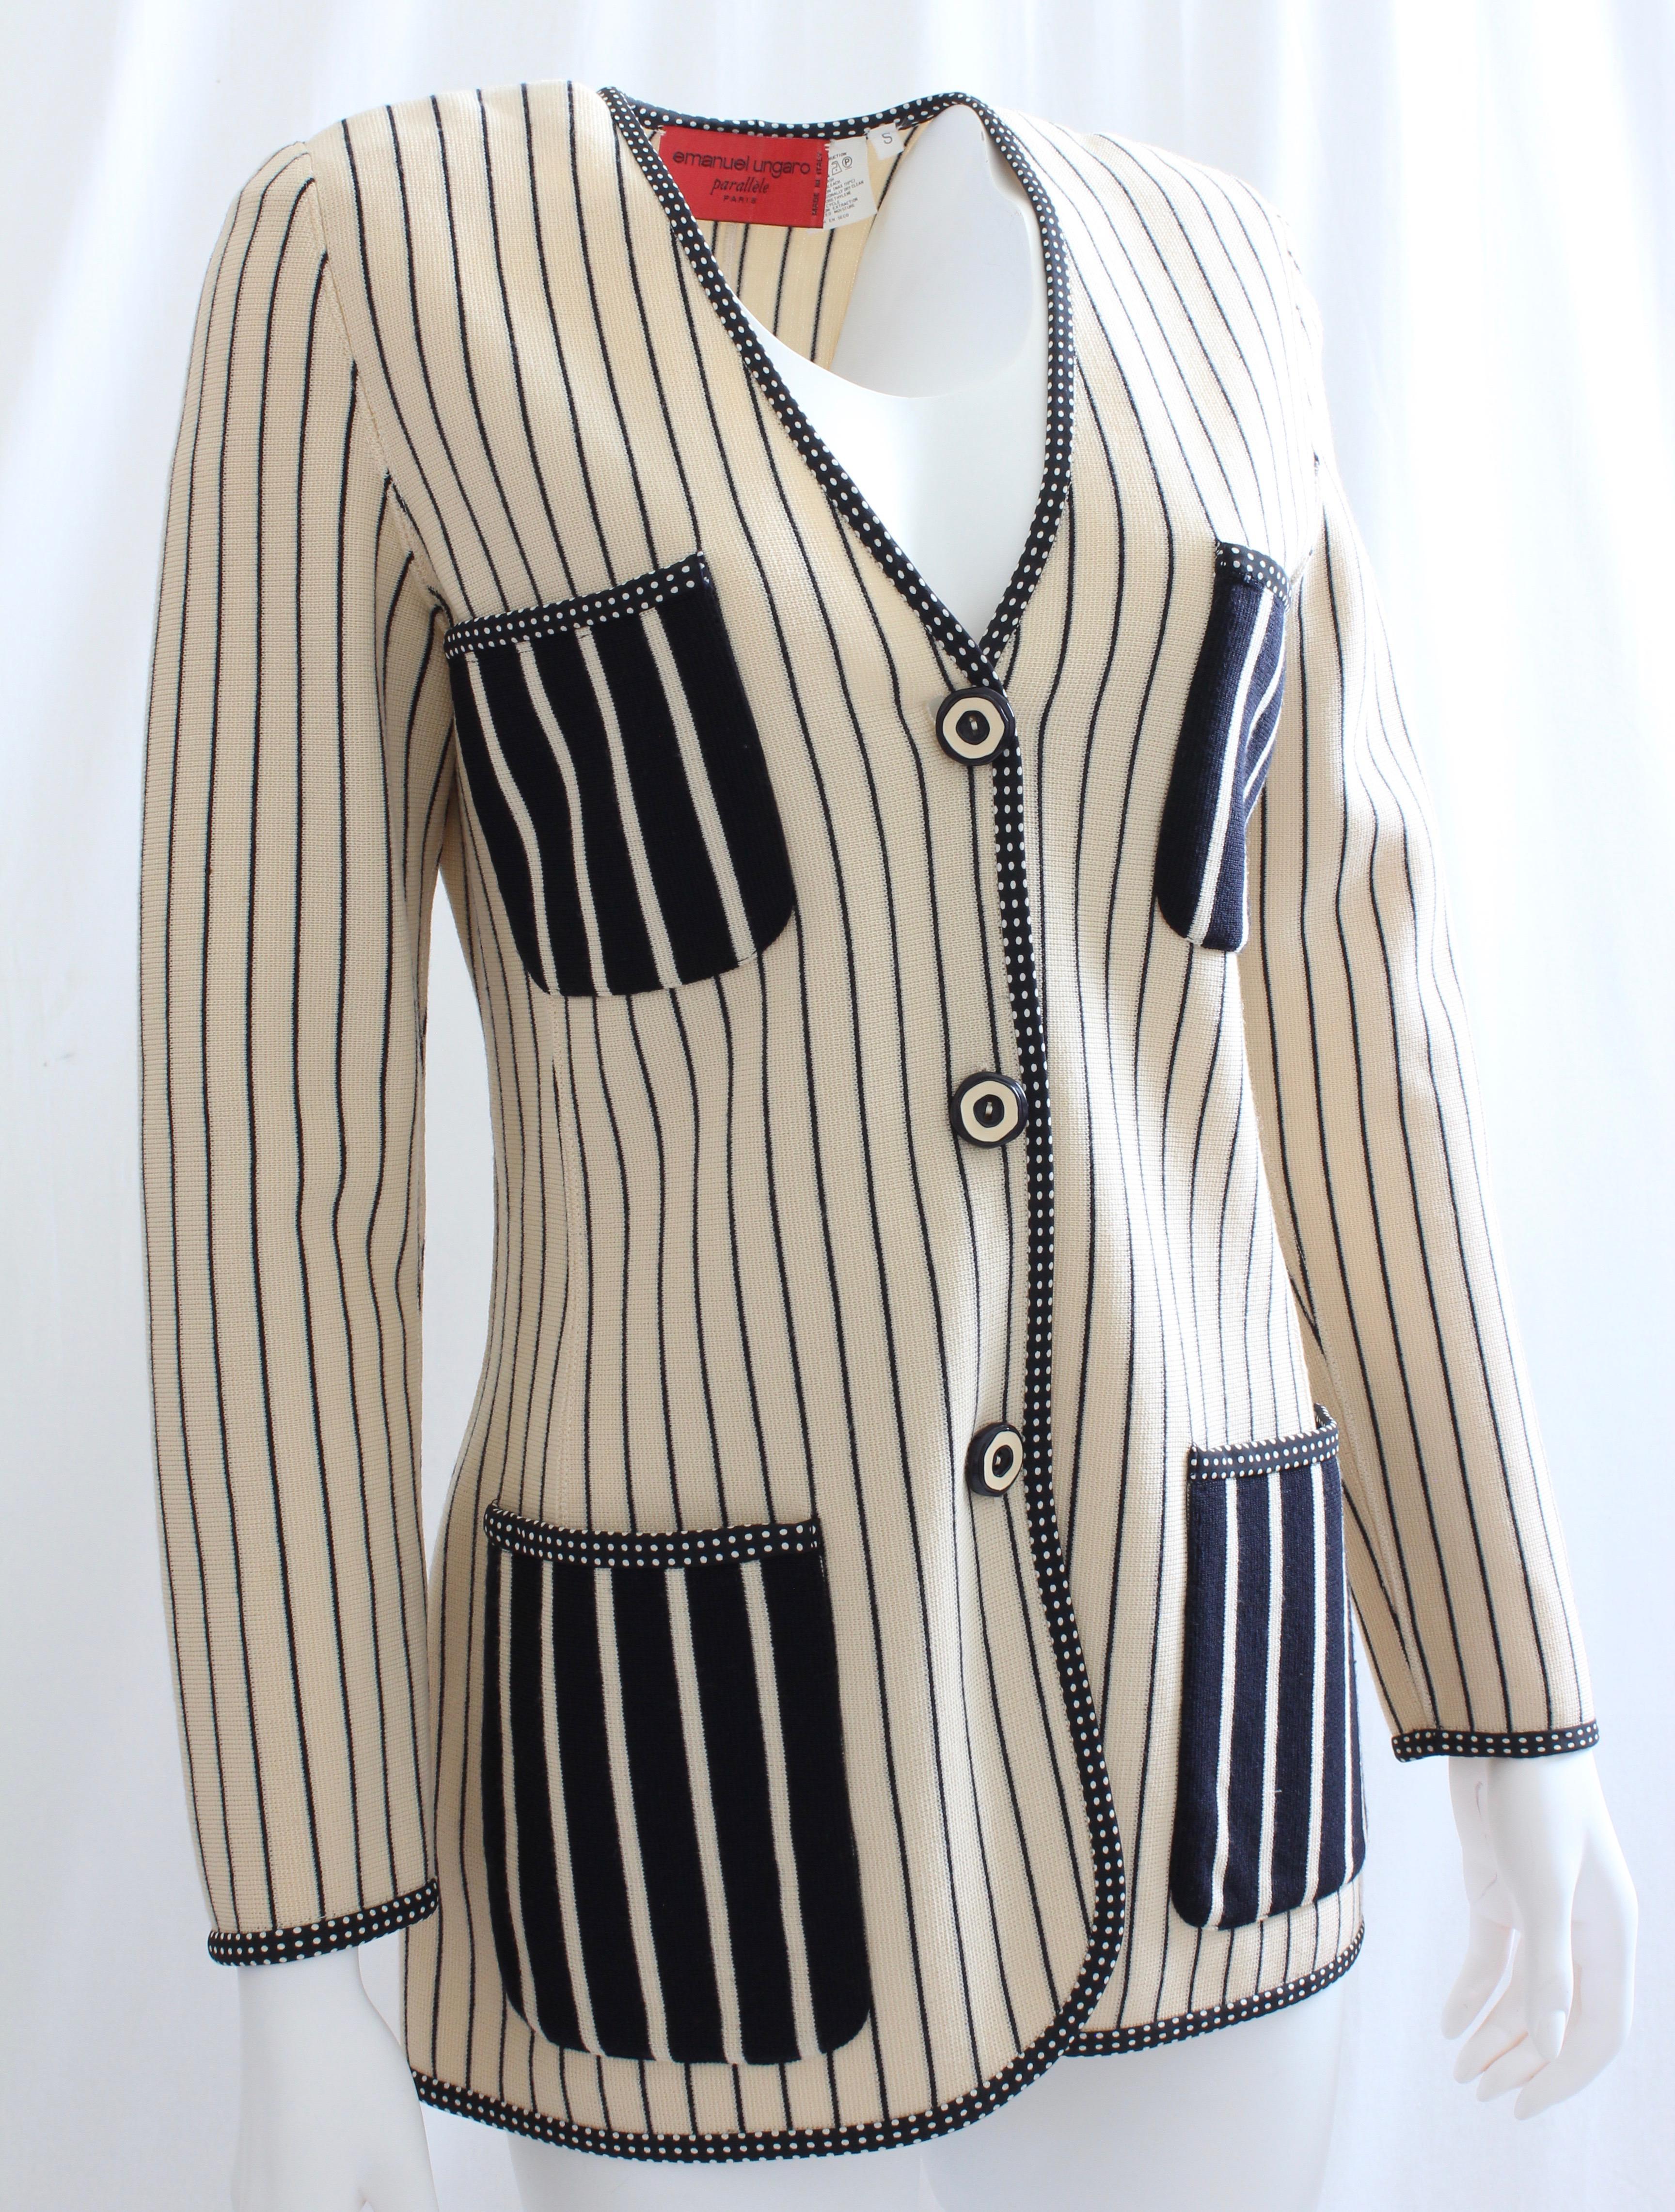 Here's a whimsical striped sweater jacket from Ungaro for their Parallele line.  Made from what we believe is a wool blend knit (no content label) this piece is unlined  with shoulder pads, and fastens with three buttons.  Preowned with signs of